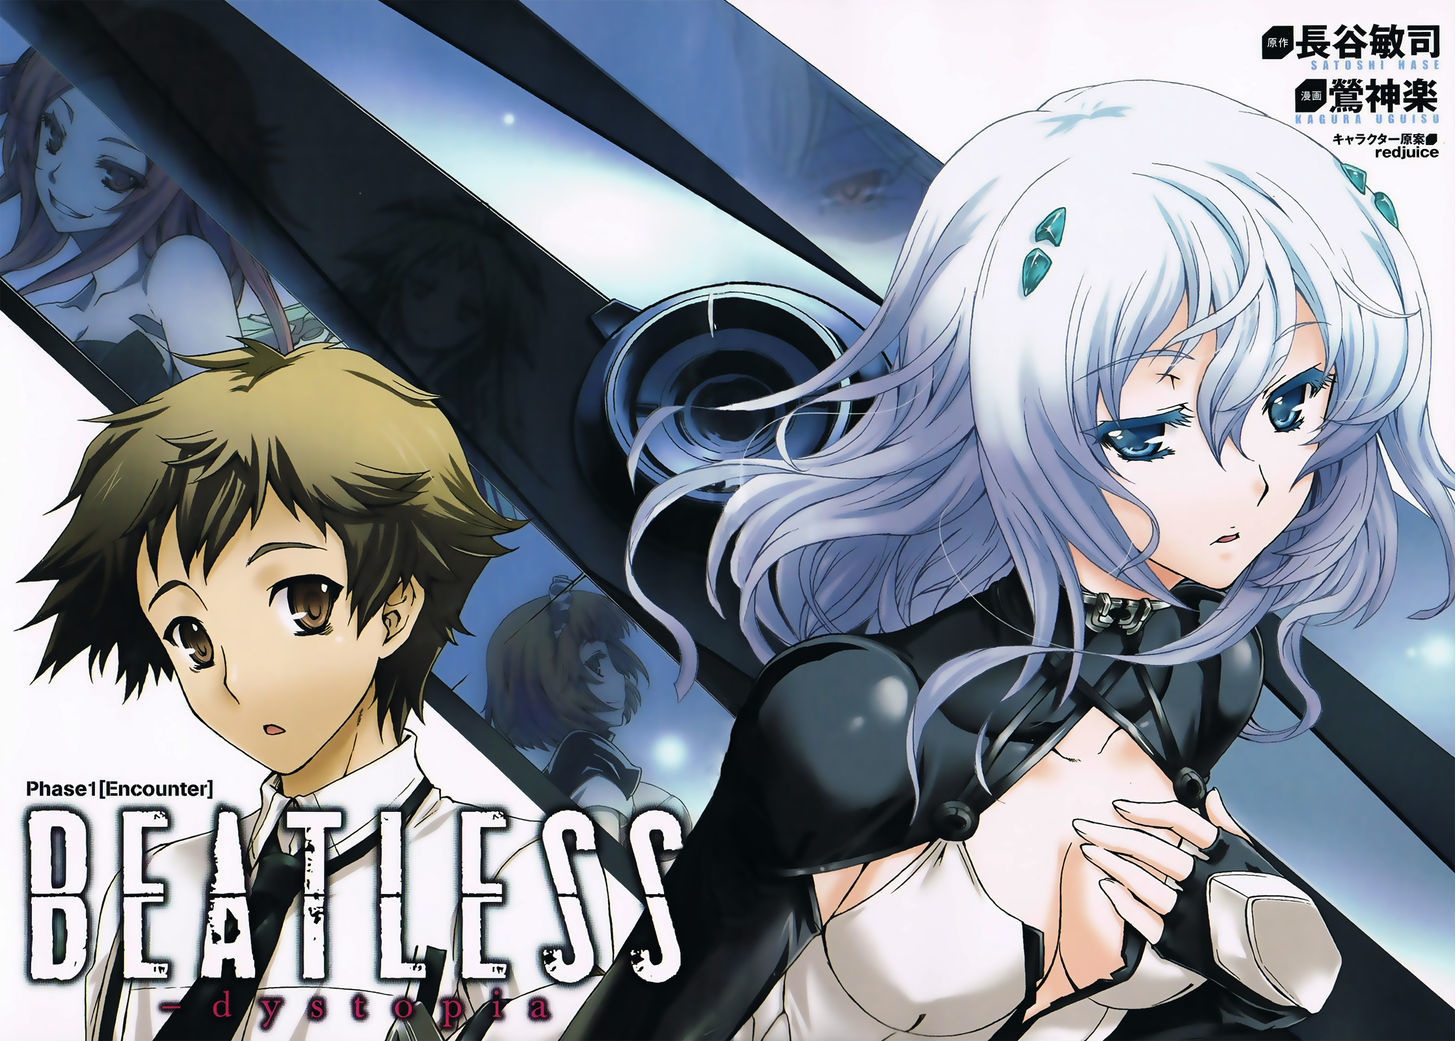 Beatless - Dystopia Chapter 1 #5